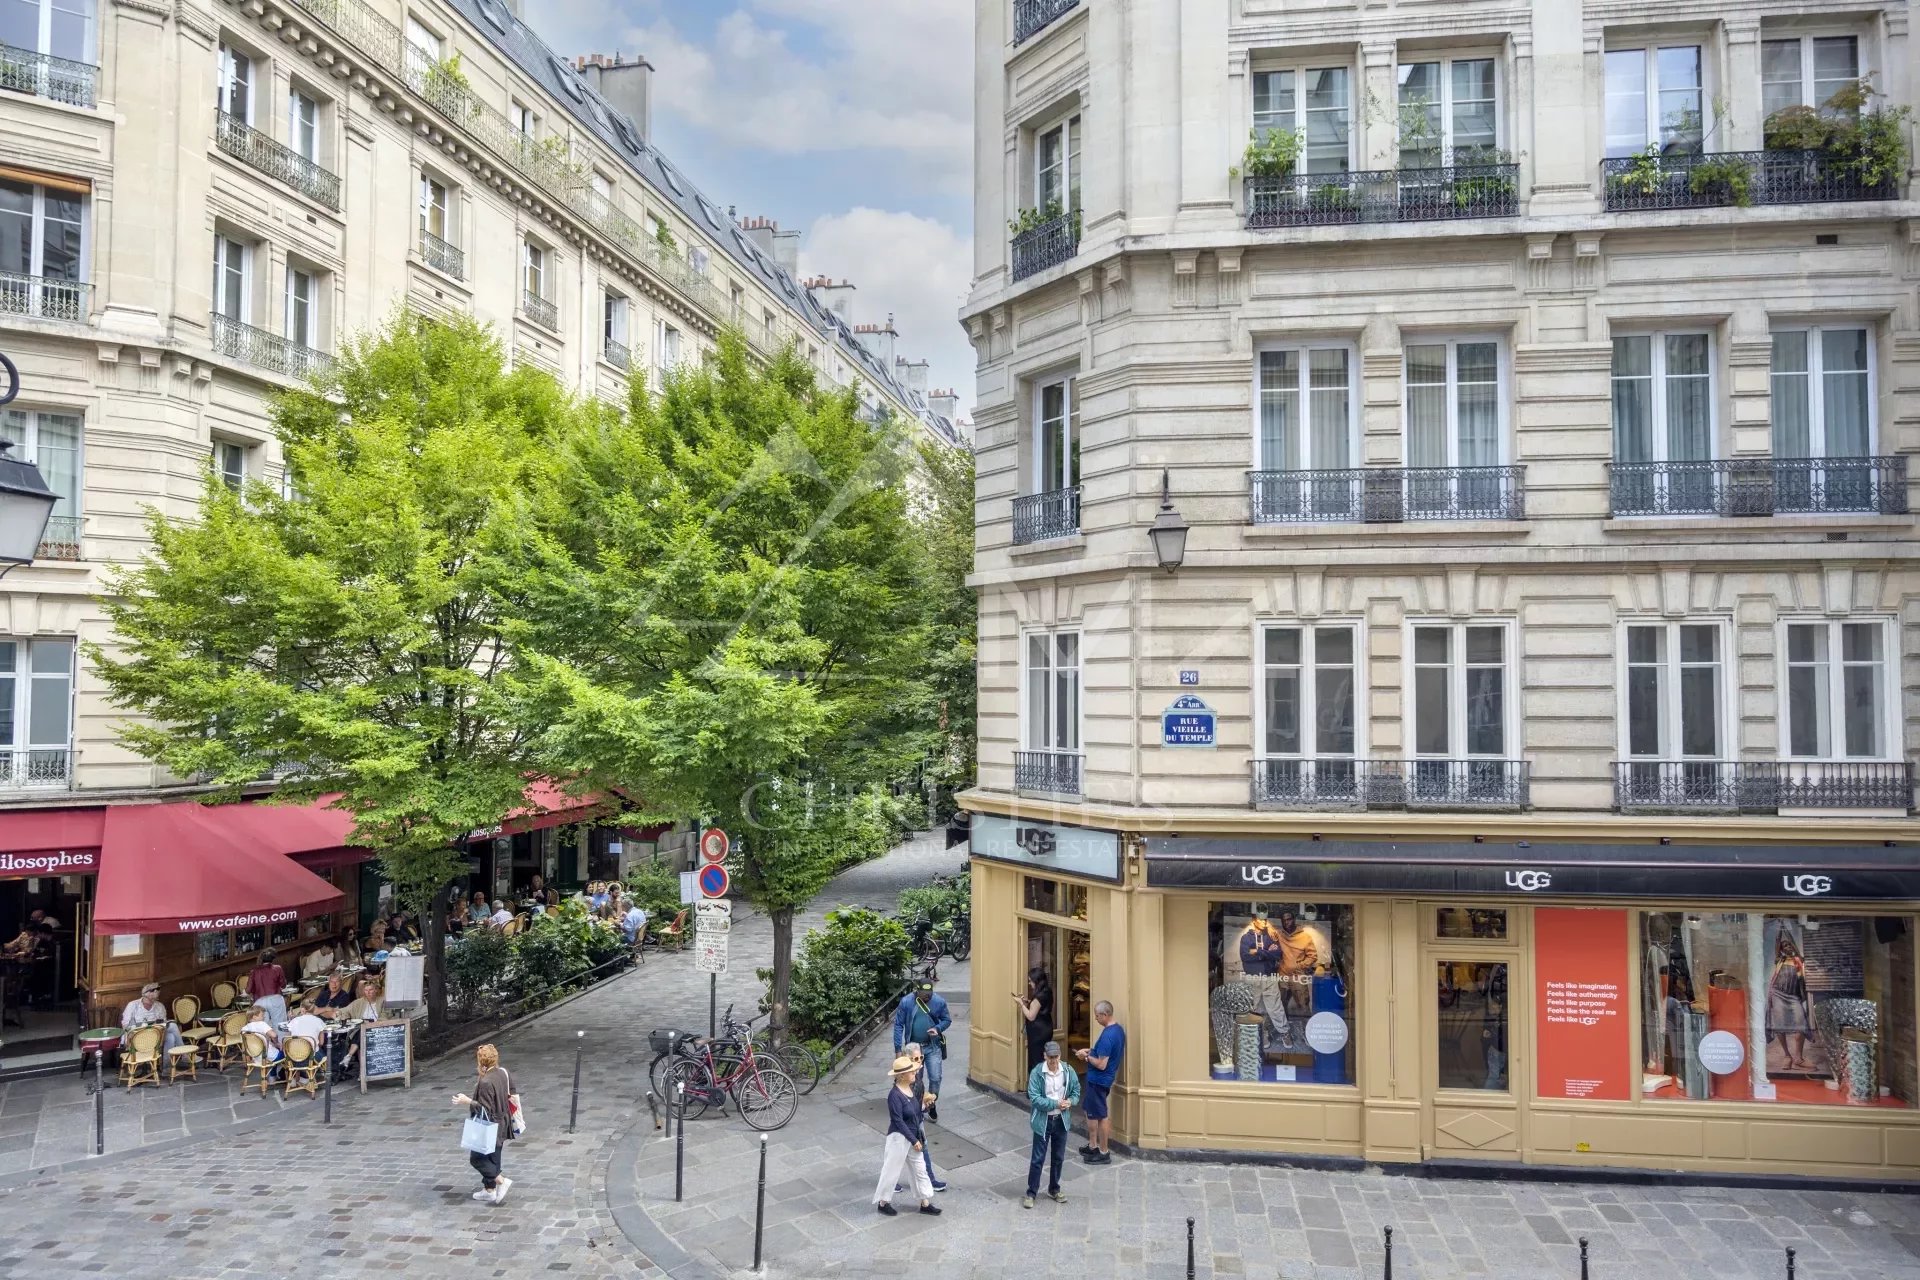 Apartment in Rue Vieille du Temple in the Marais to renovate